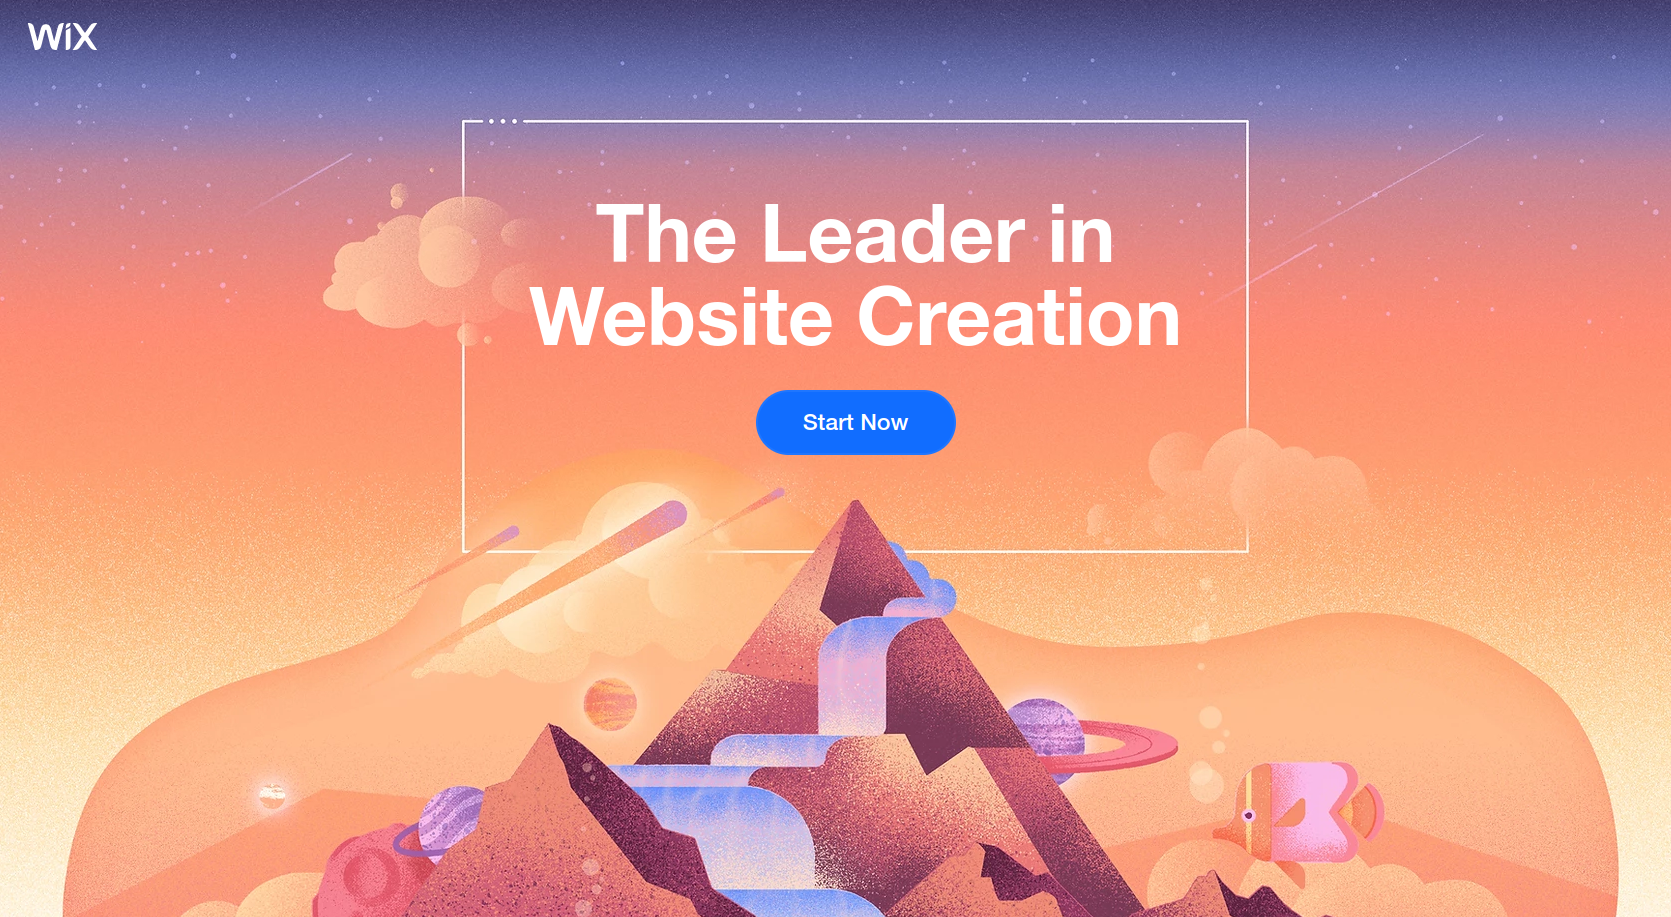 The CTA button on the "get started" landing page is at the top of the page